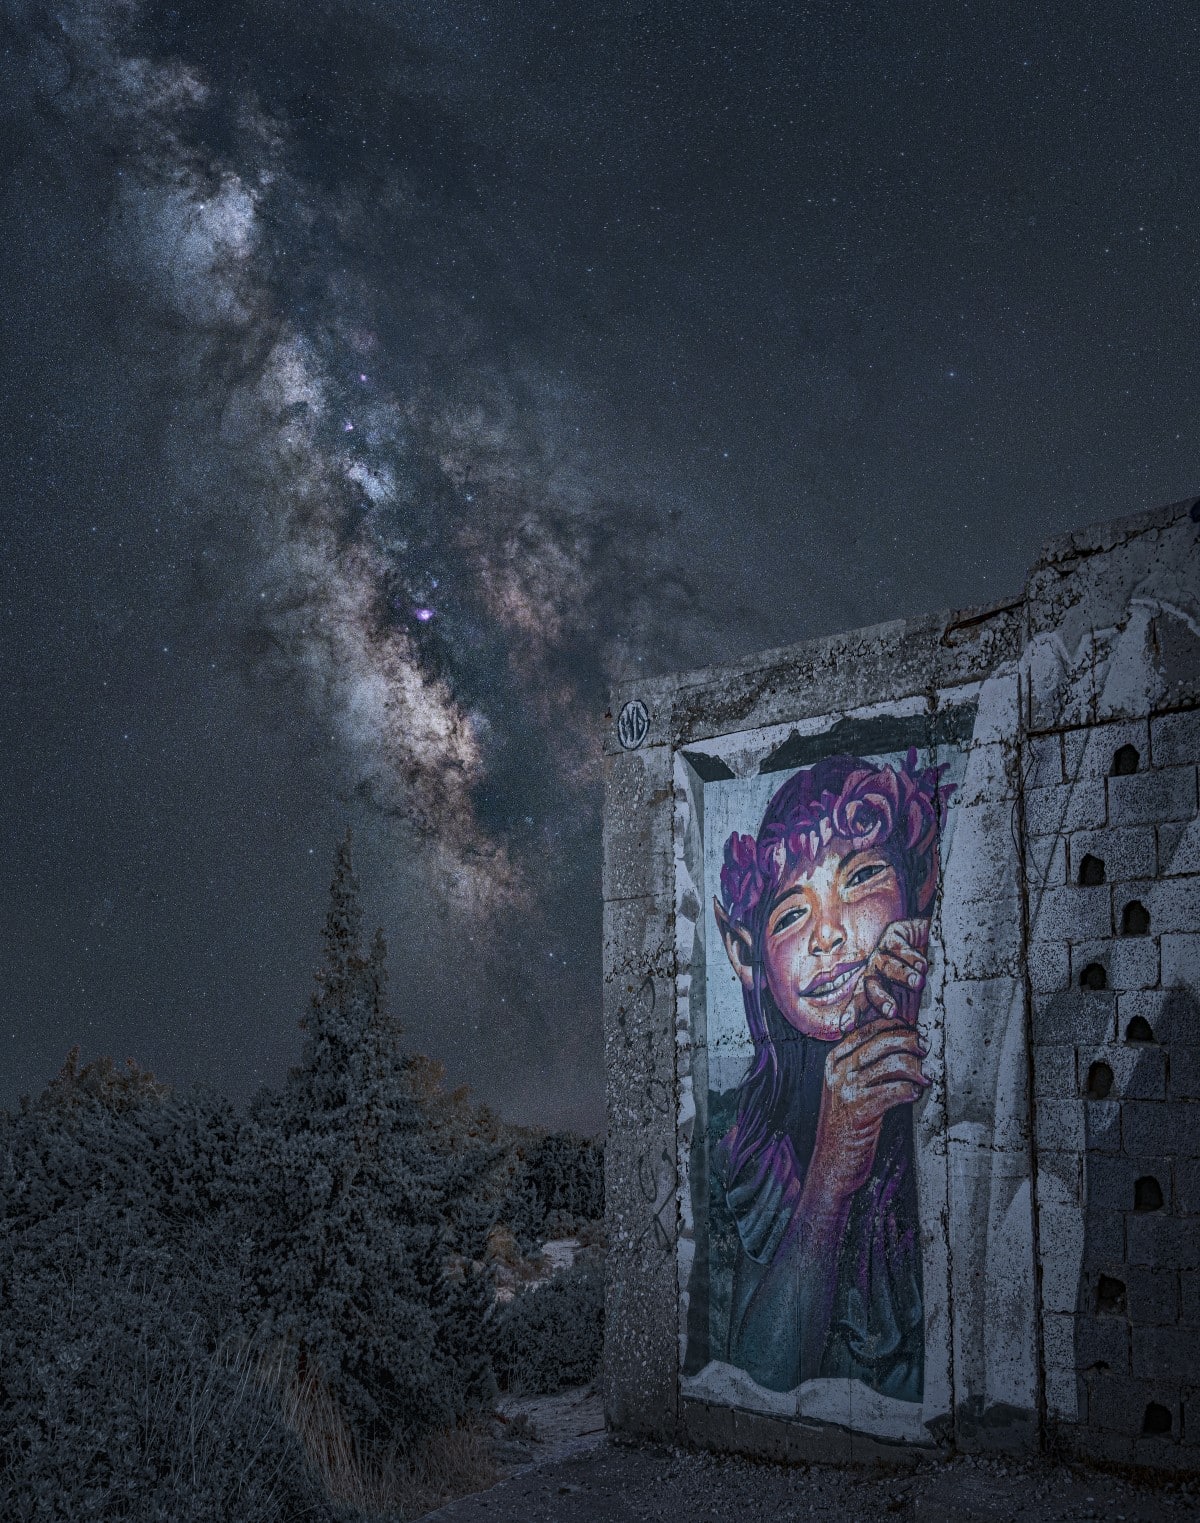 Milky Way viewed behind a graffiti of Pandora by Wild Drawing (WD) a Balinese artist on the Greek island of Naxos